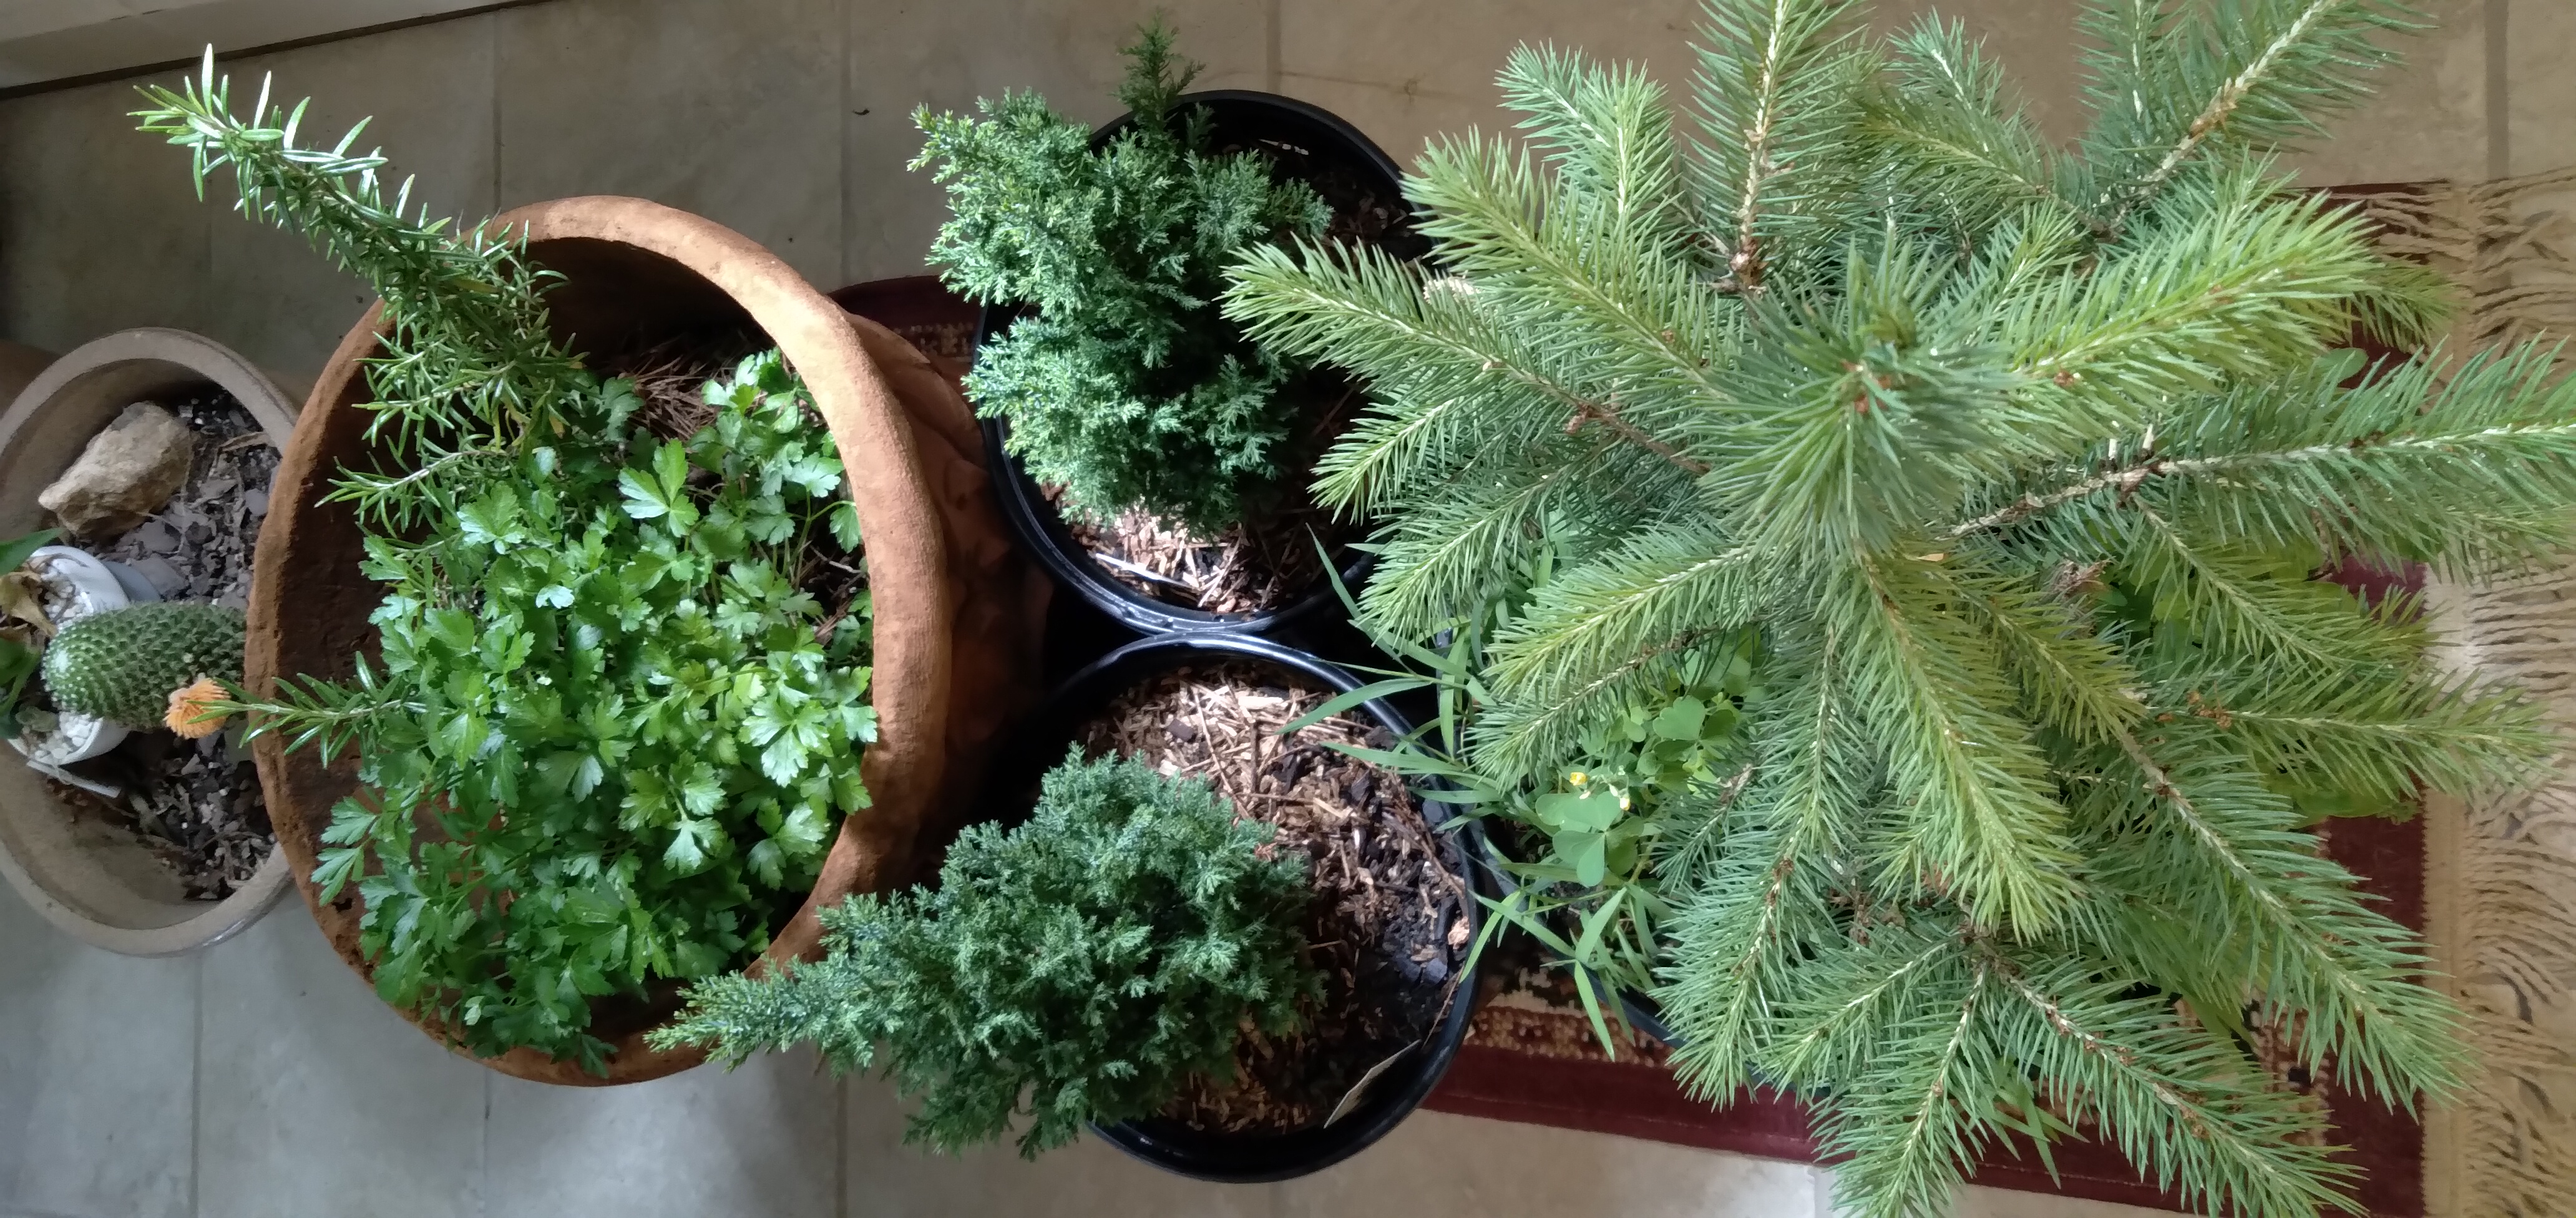 Herbs, Spruce, Aromatic Plants, and Phytoncides